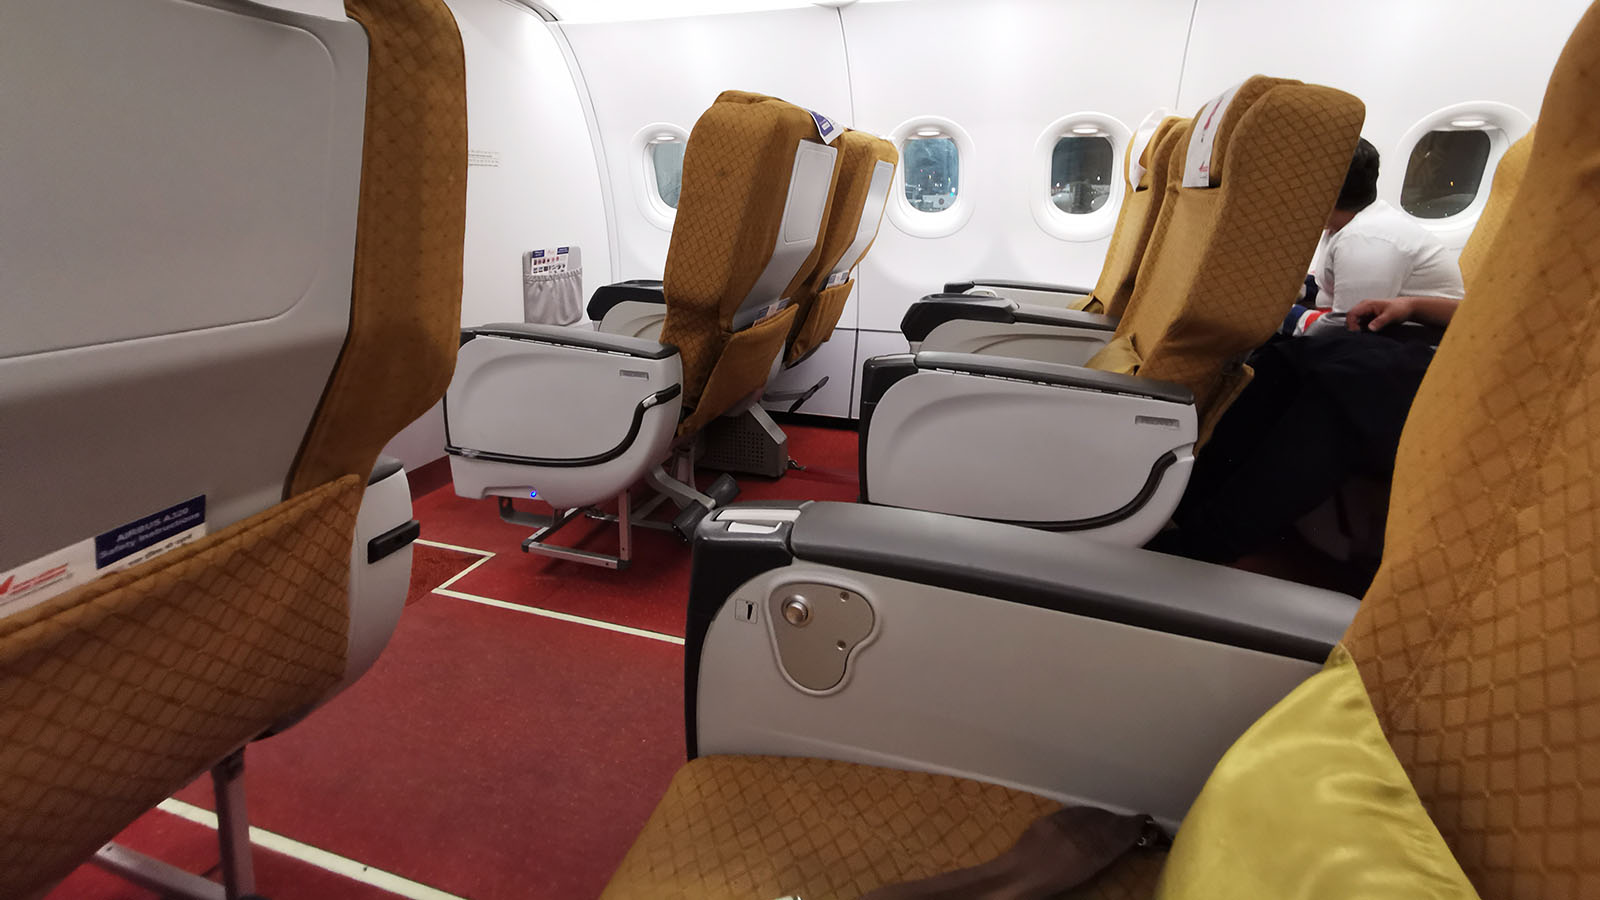 Air India's A320neo Business Class cabin has 12 seats